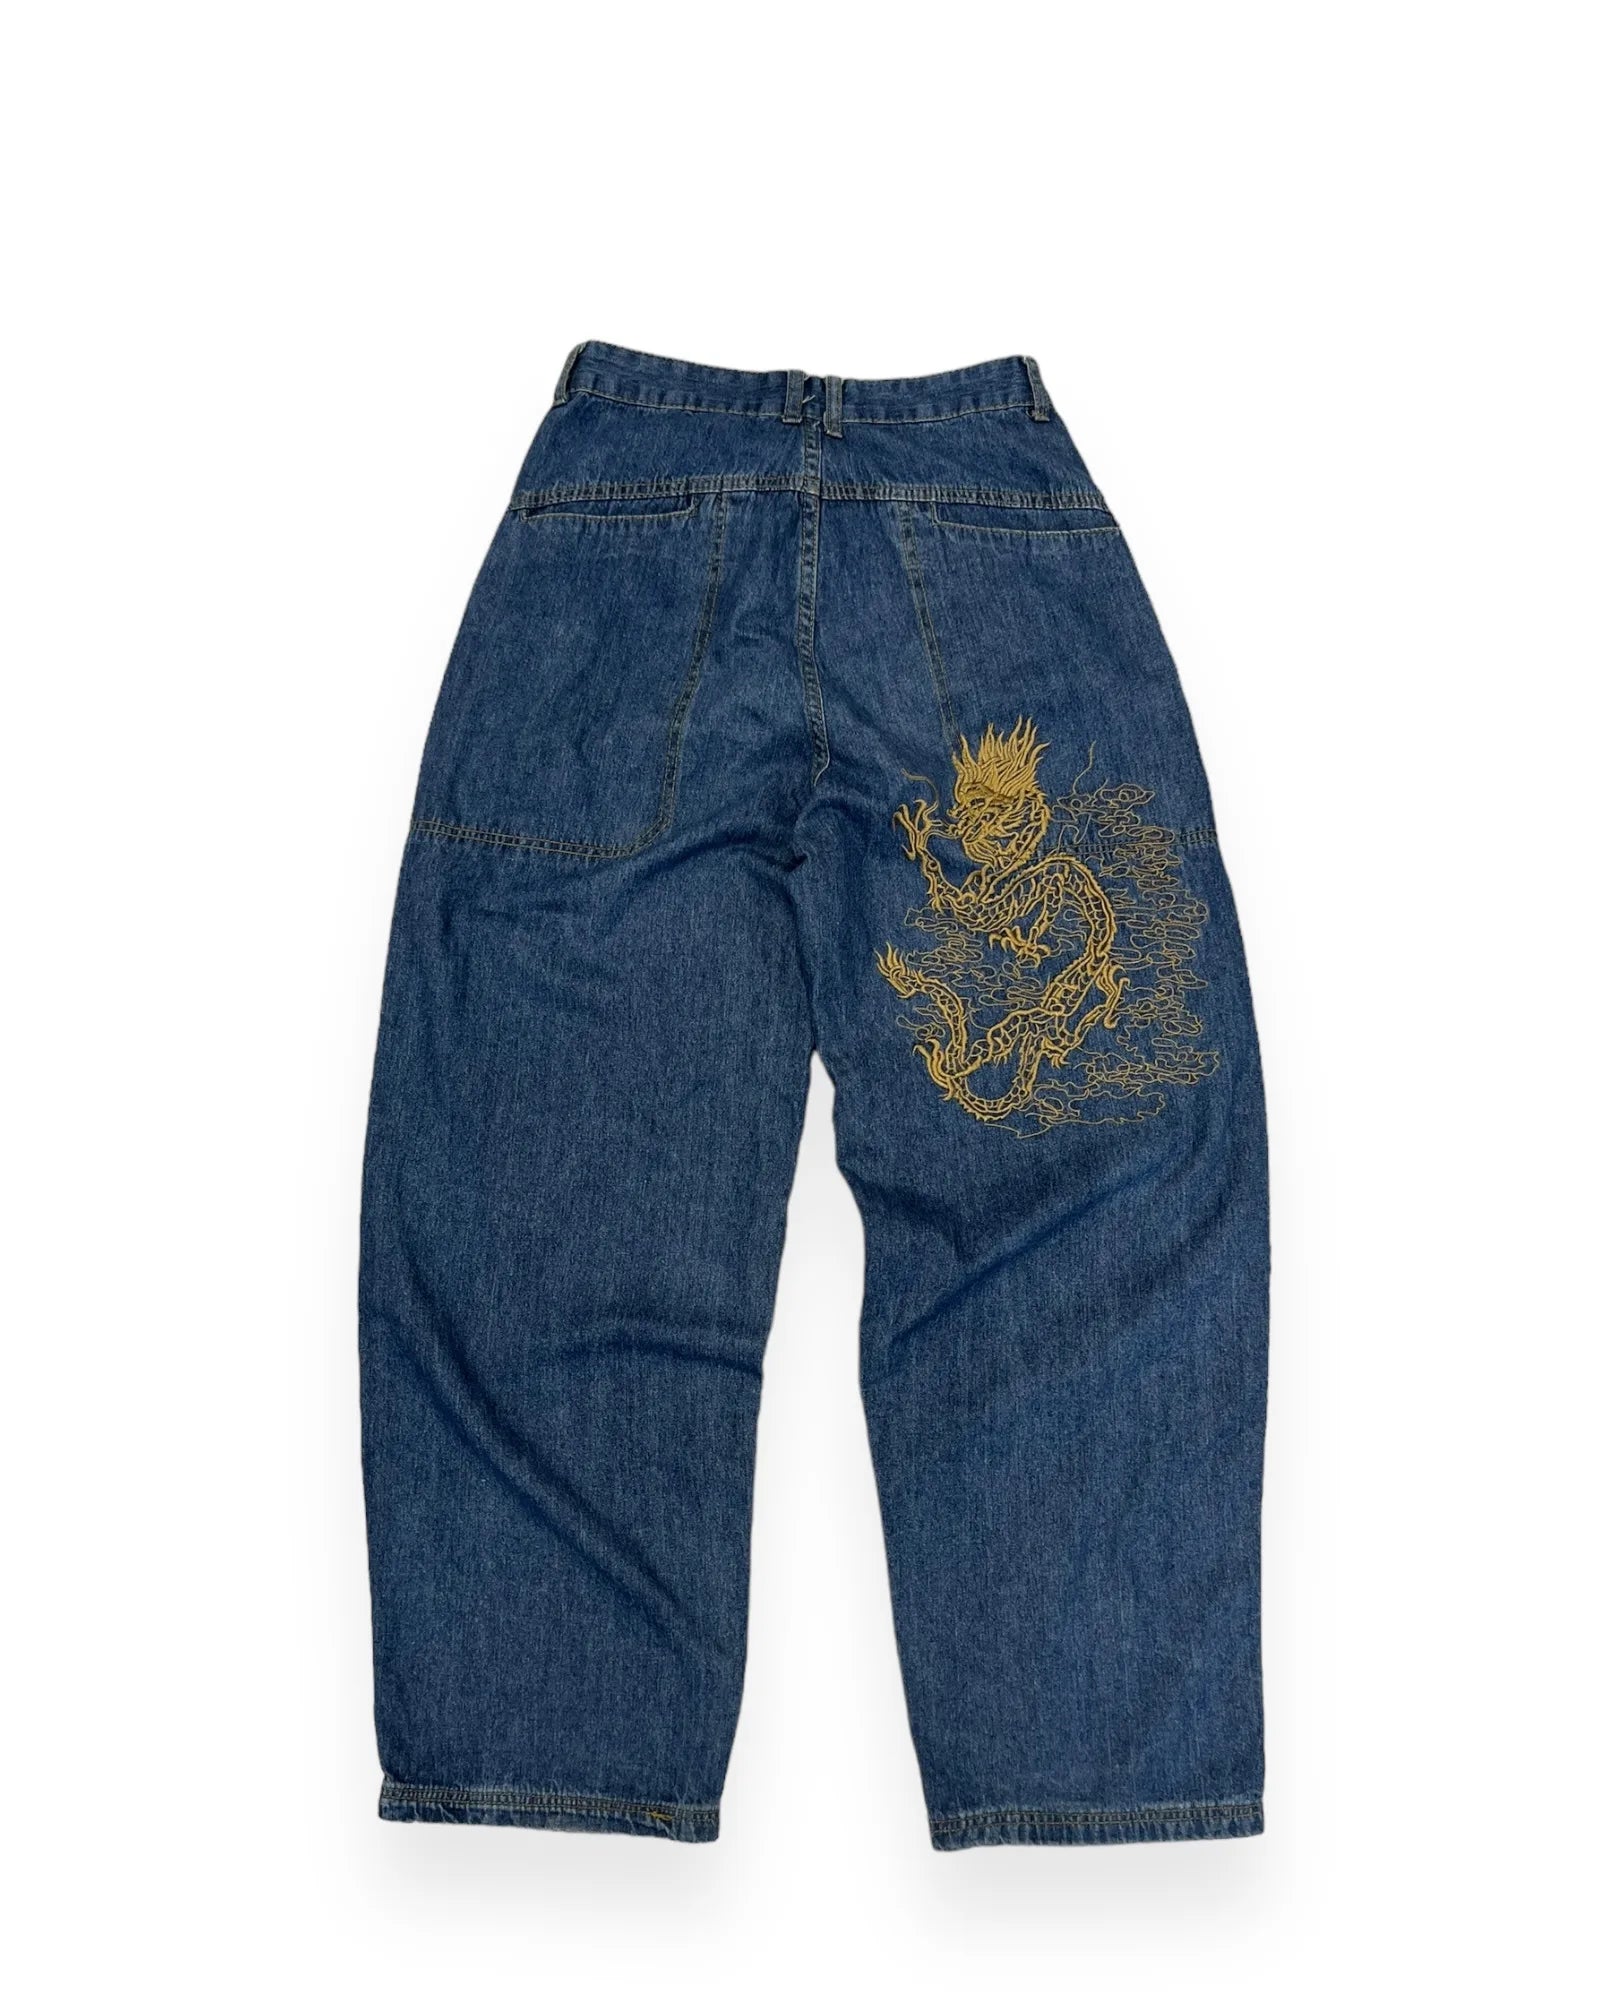 Embroided Jeans - S 